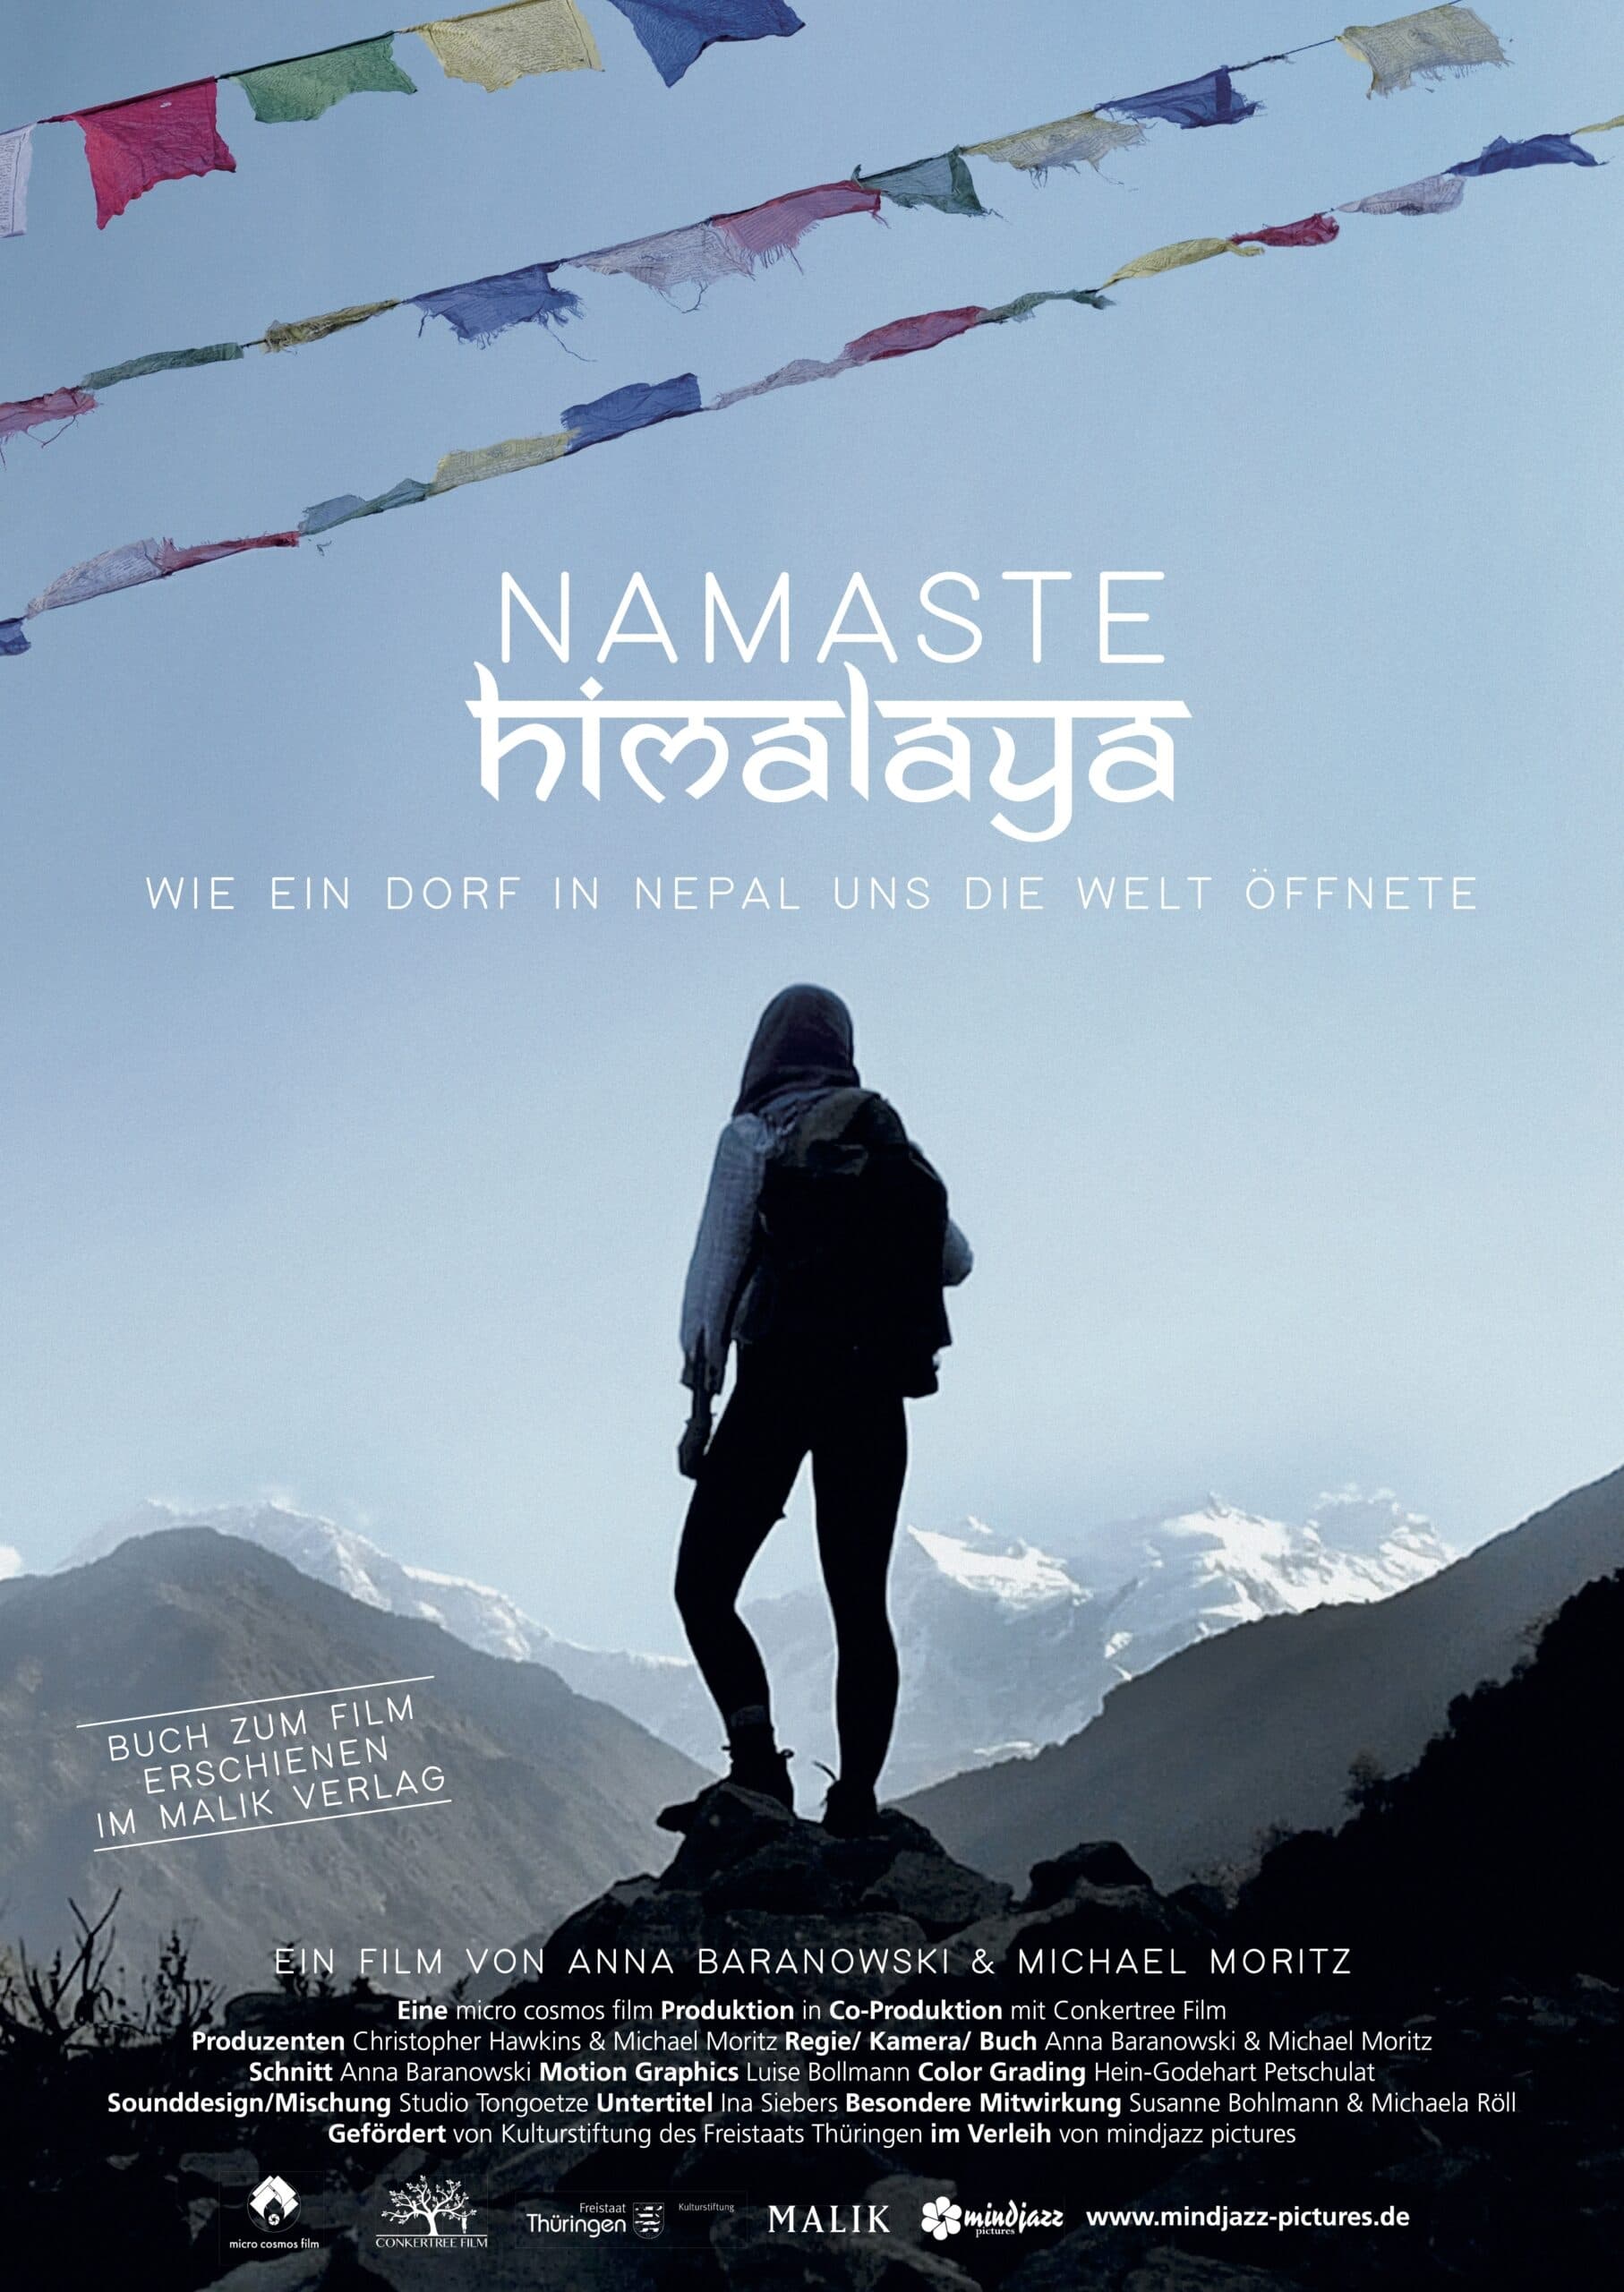 Namaste Himalaya - How a village in Nepal opened the world to us